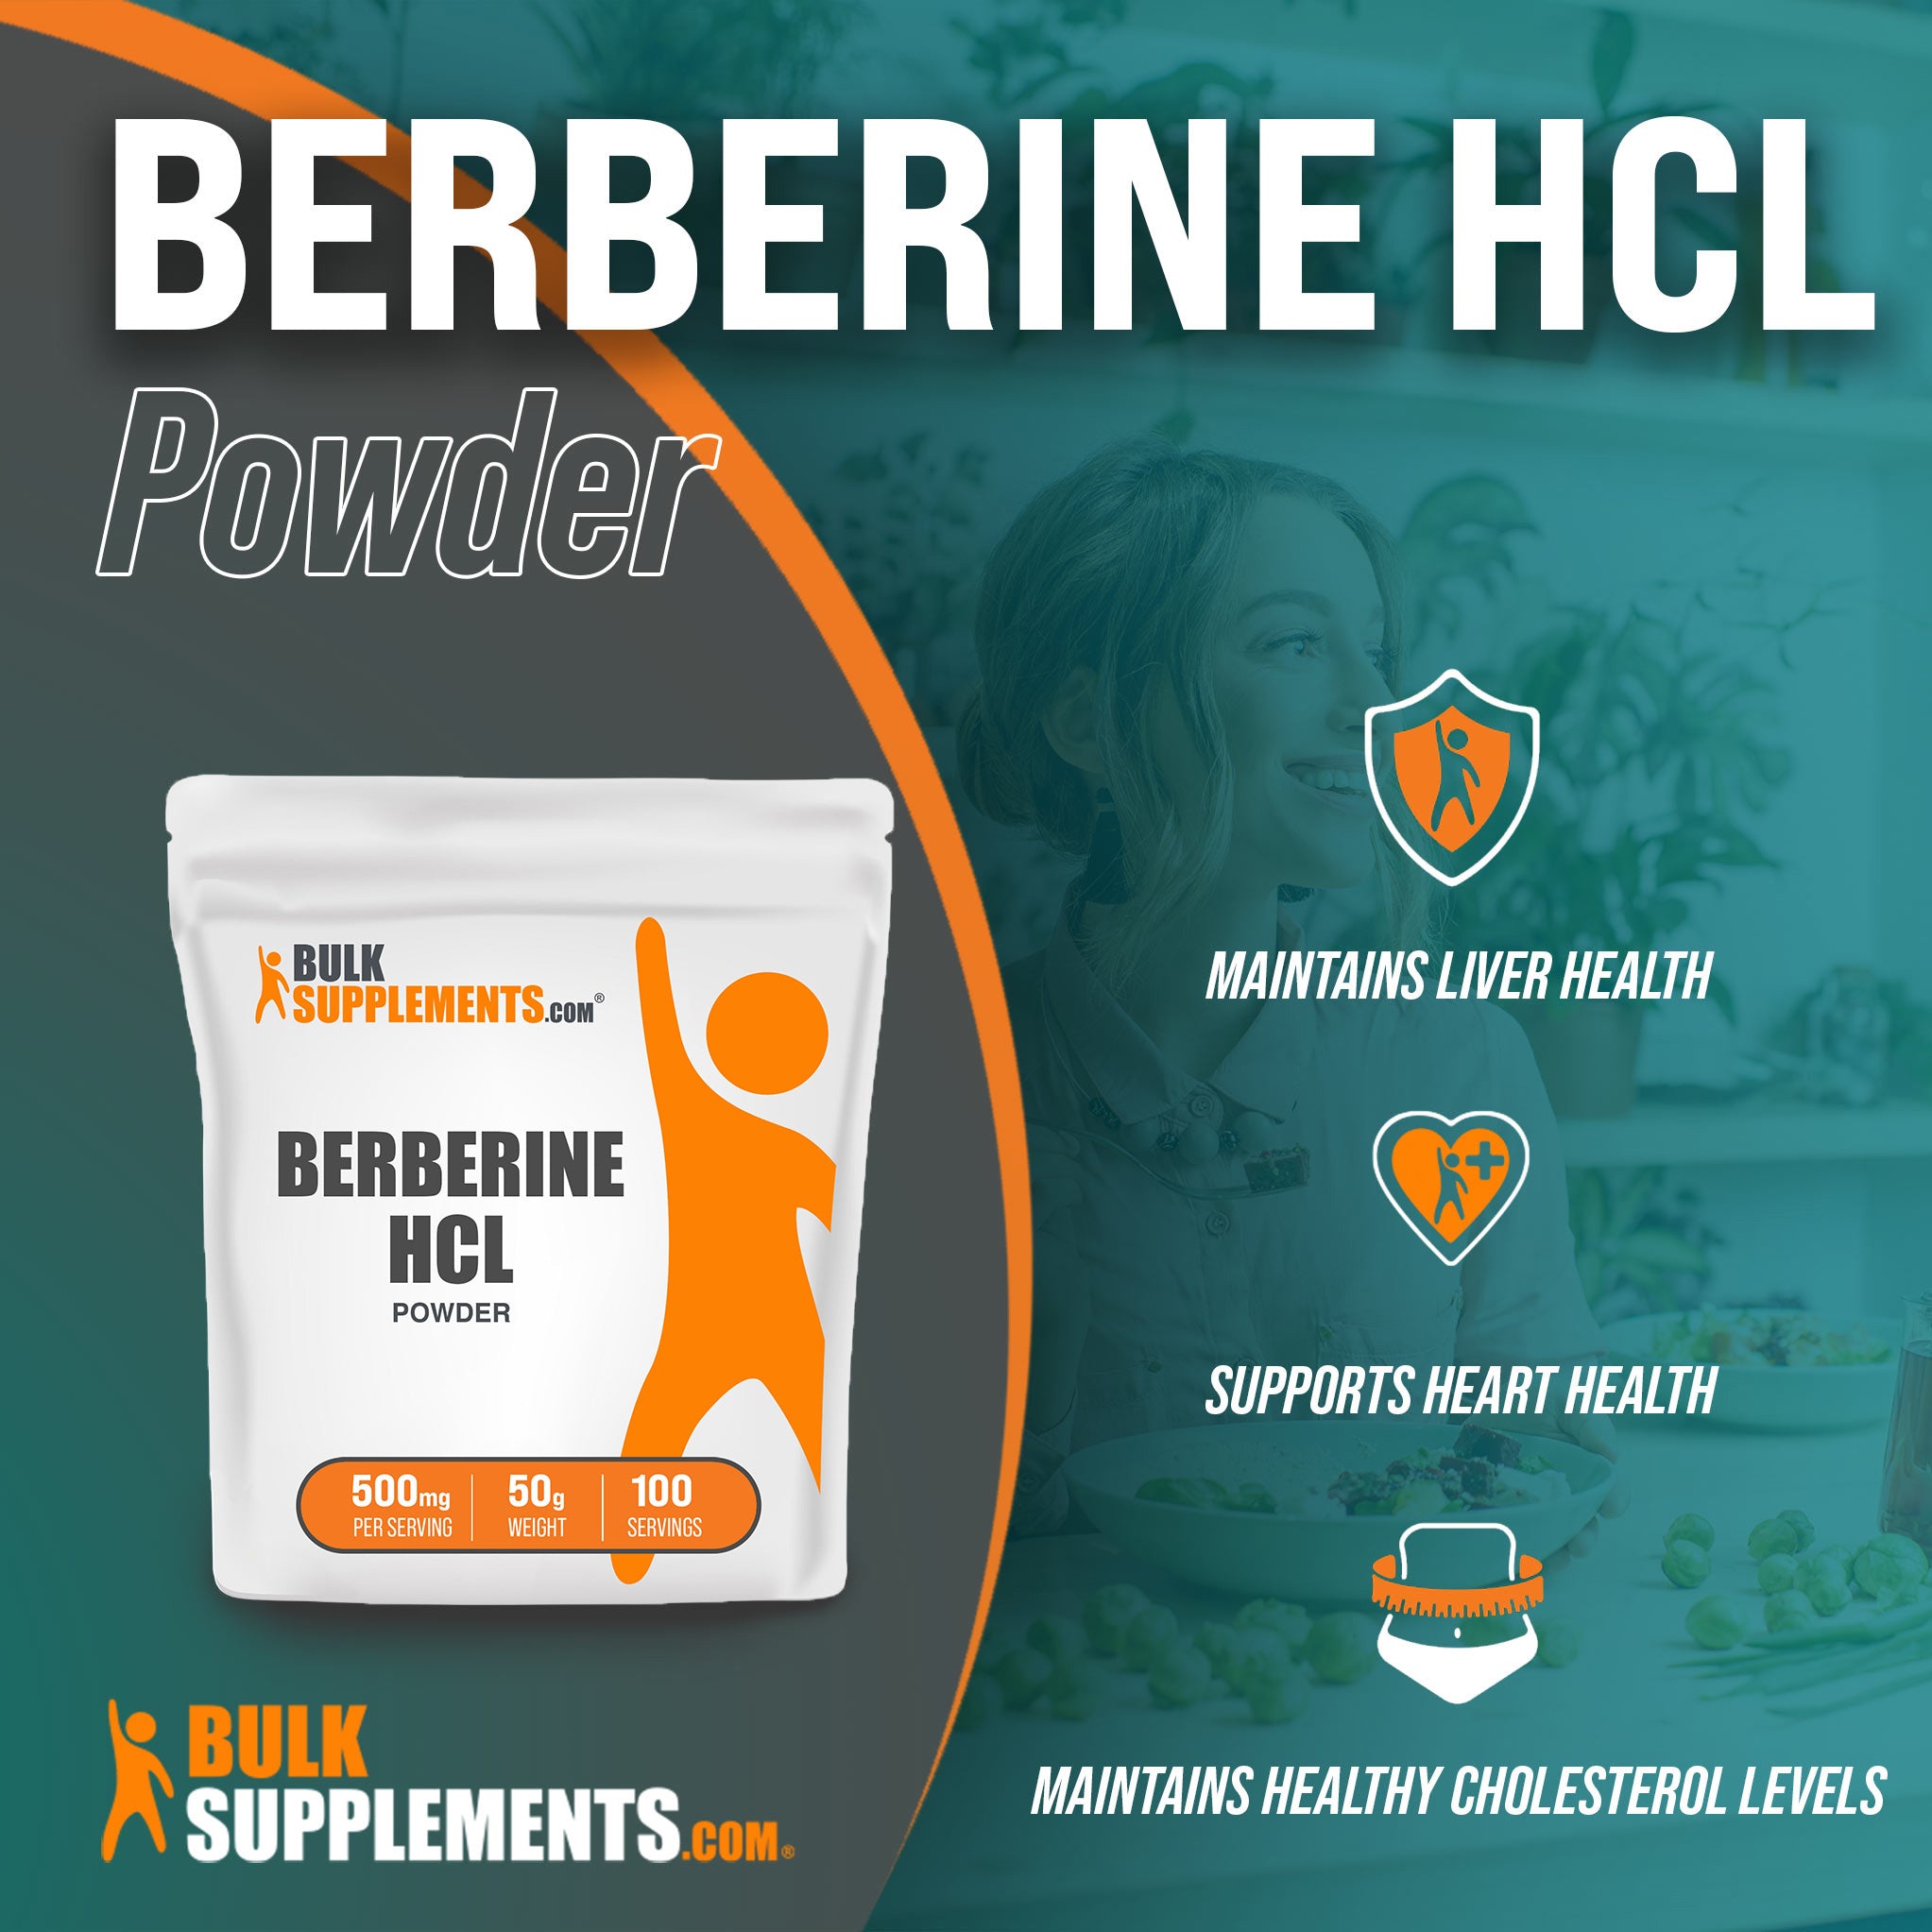 Berberine HCl from Bulk Supplements to help maintain healthy cholesterol levels